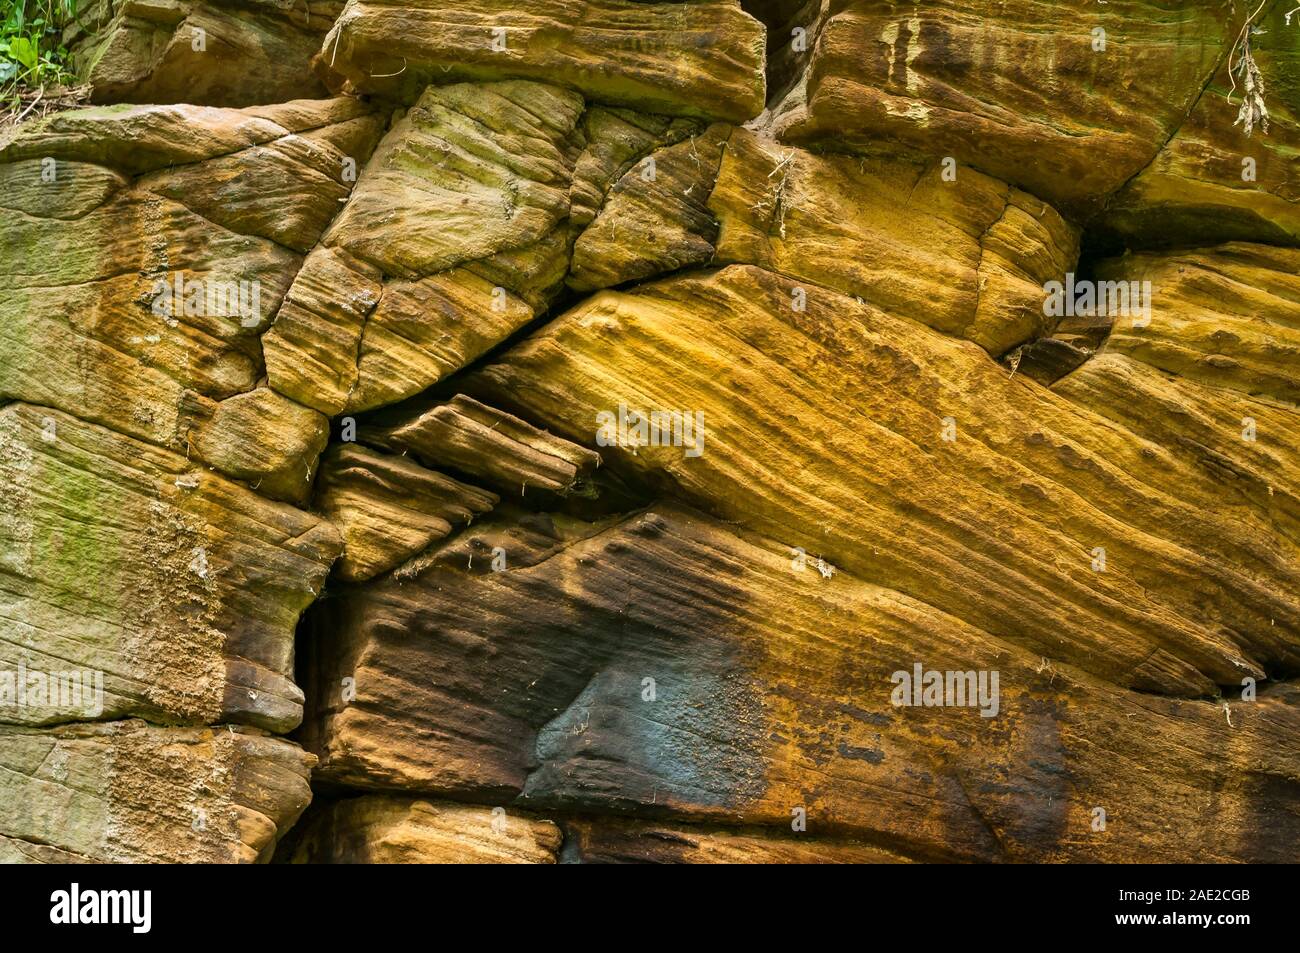 Exposed fluvial sandstone beds in an old quarry in Ravenfield near Rotherham, showing cross-bedding. Stock Photo